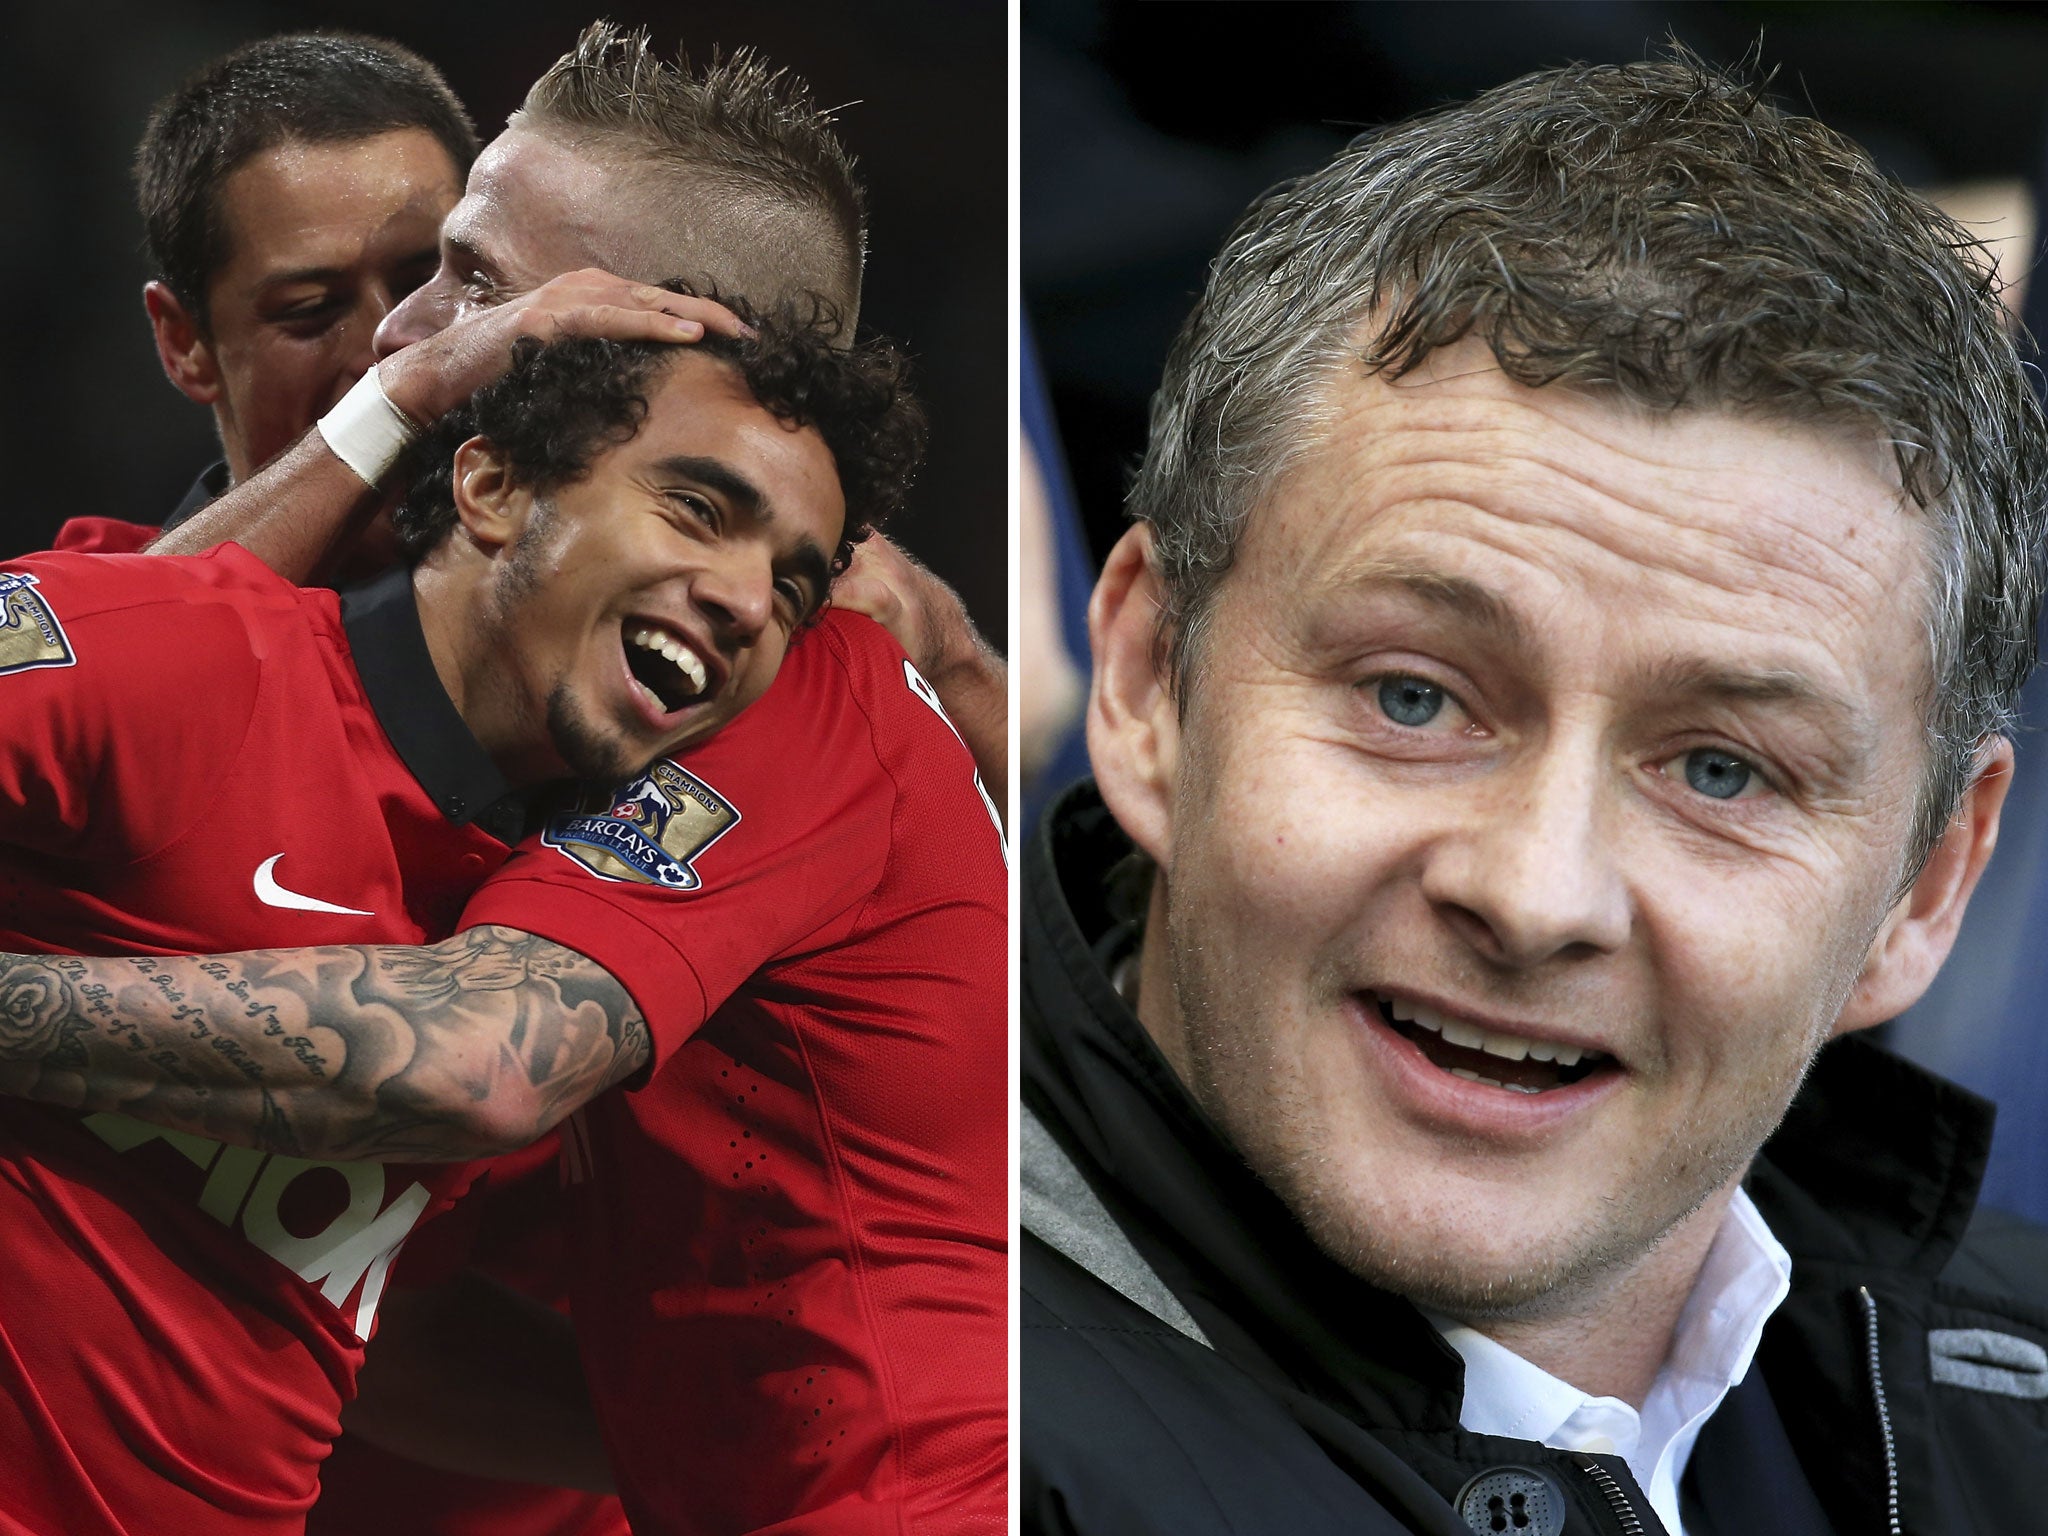 Manchester United's Fabio set for Cardiff City after Ole Gunnar Solskjaer makes late move